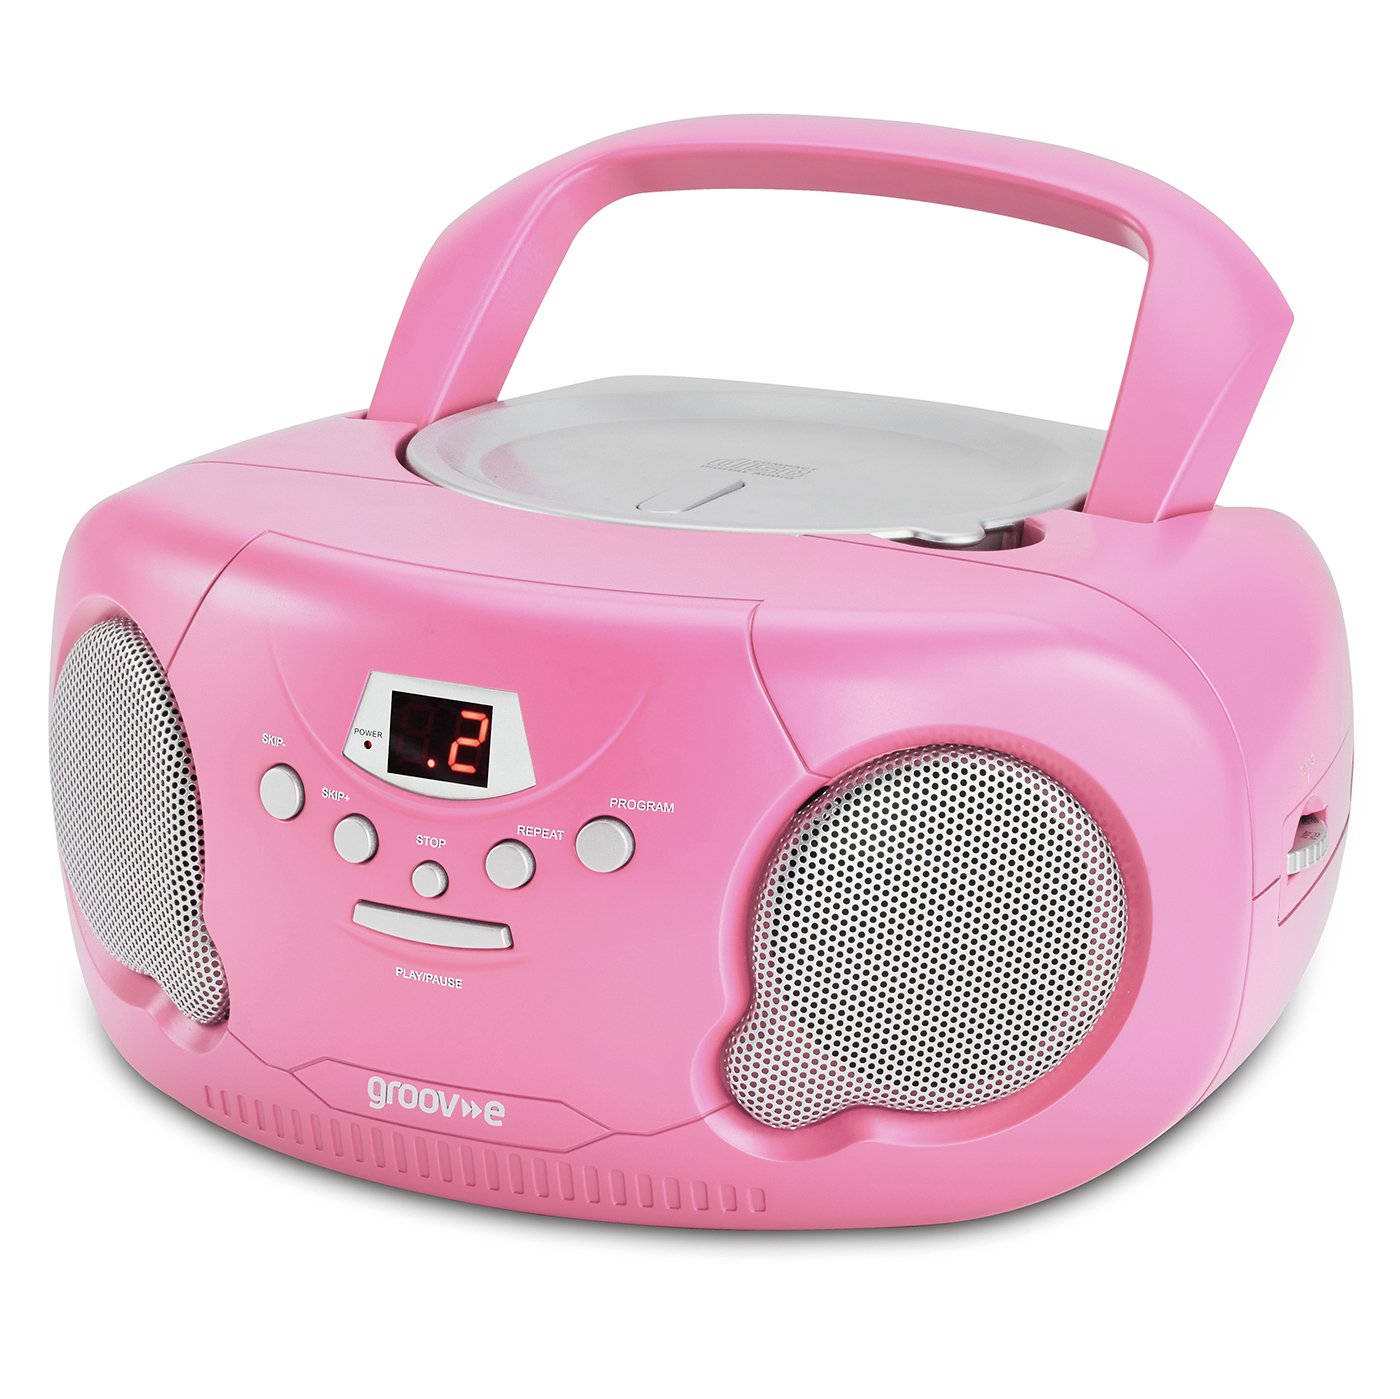 Groove Boombox CD Player with Radio Review